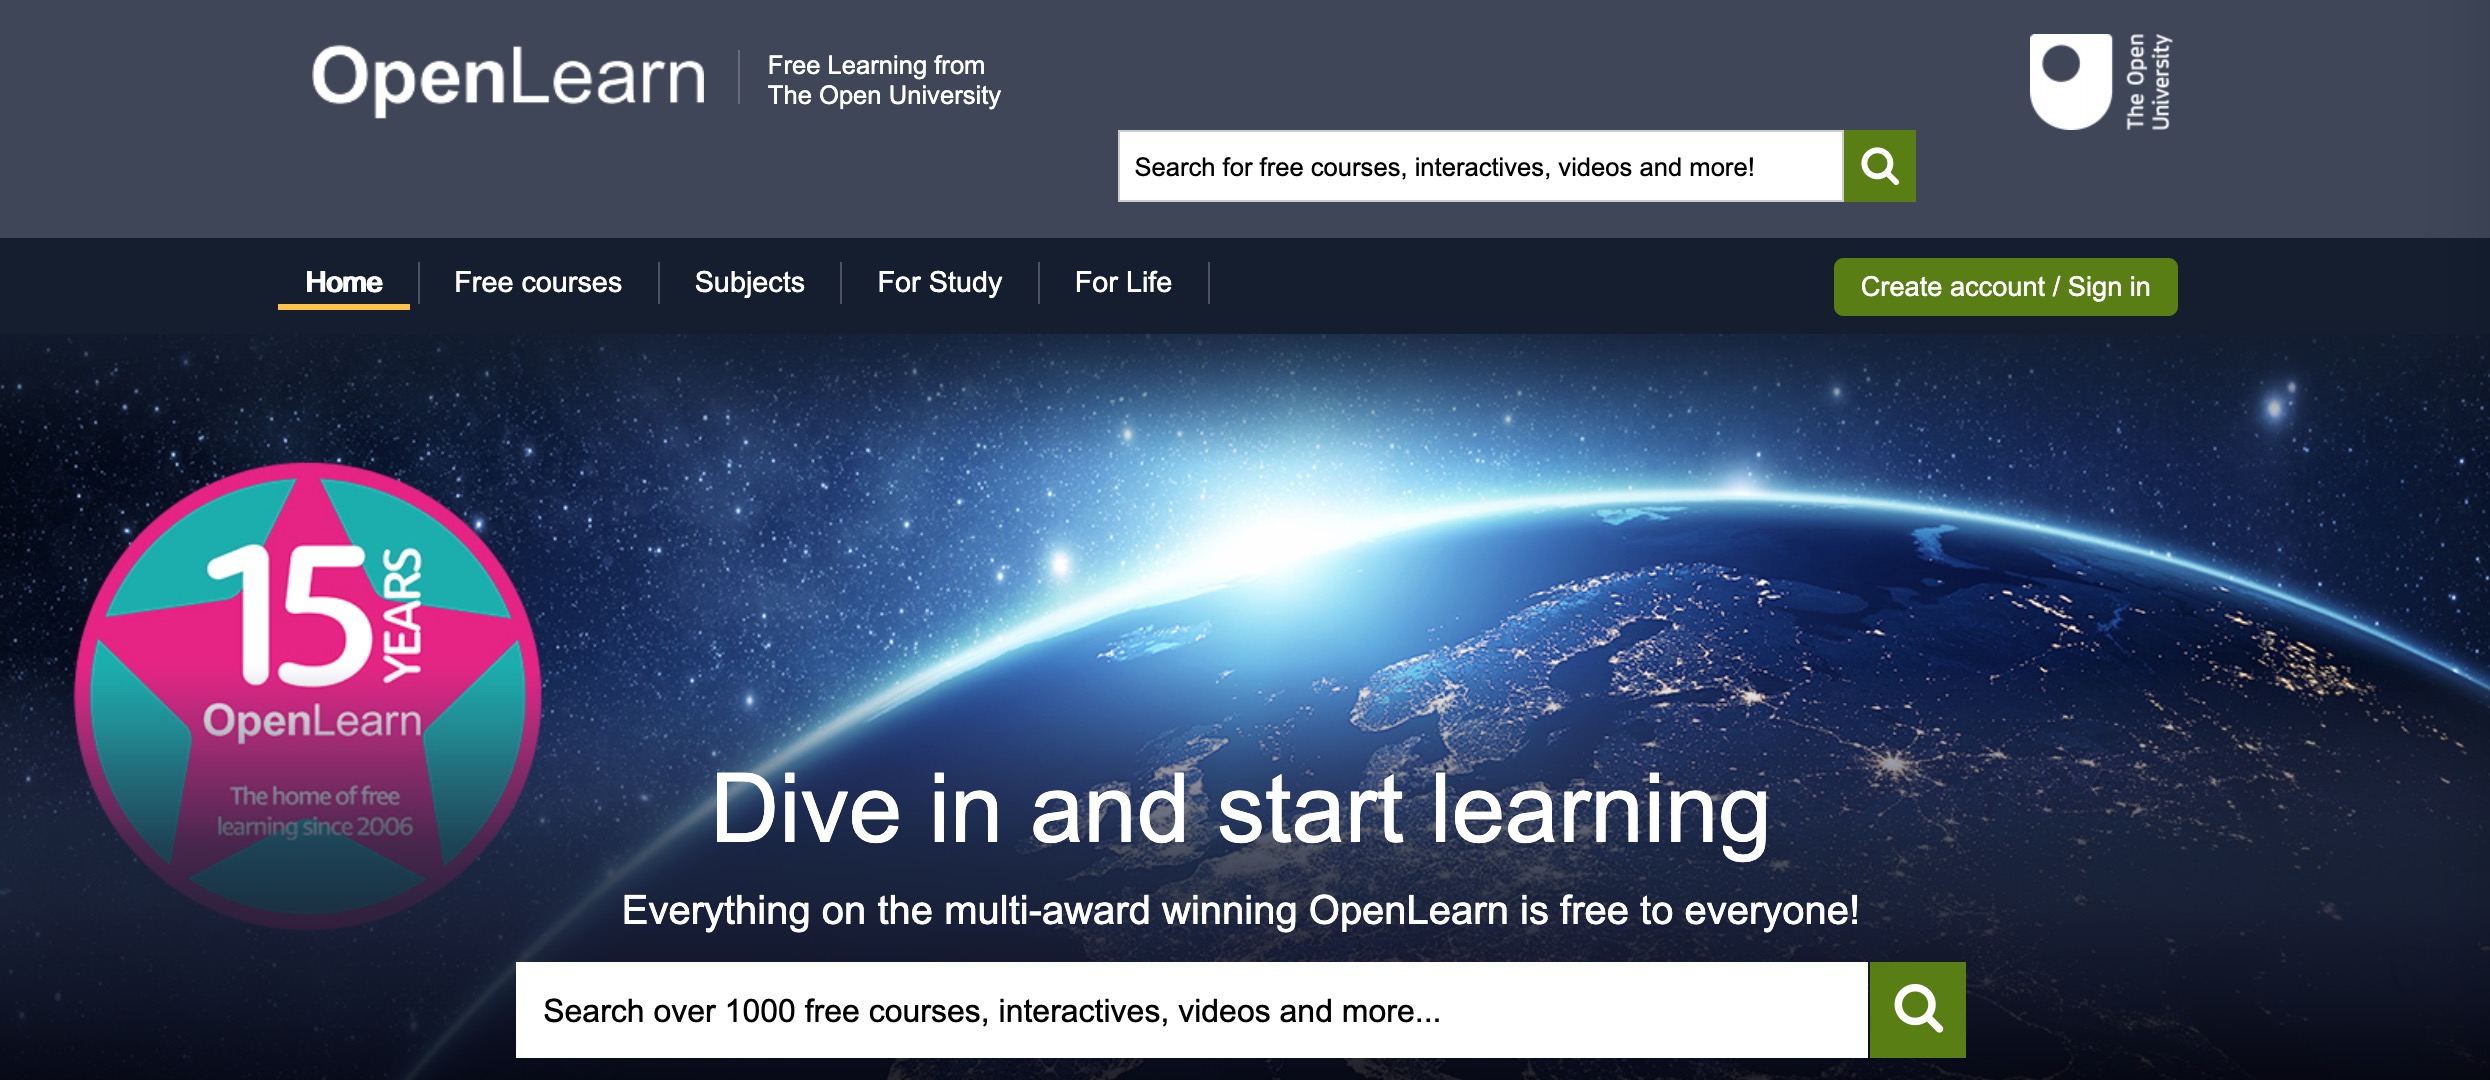 OpenLearn Web site - Dive in and start learning